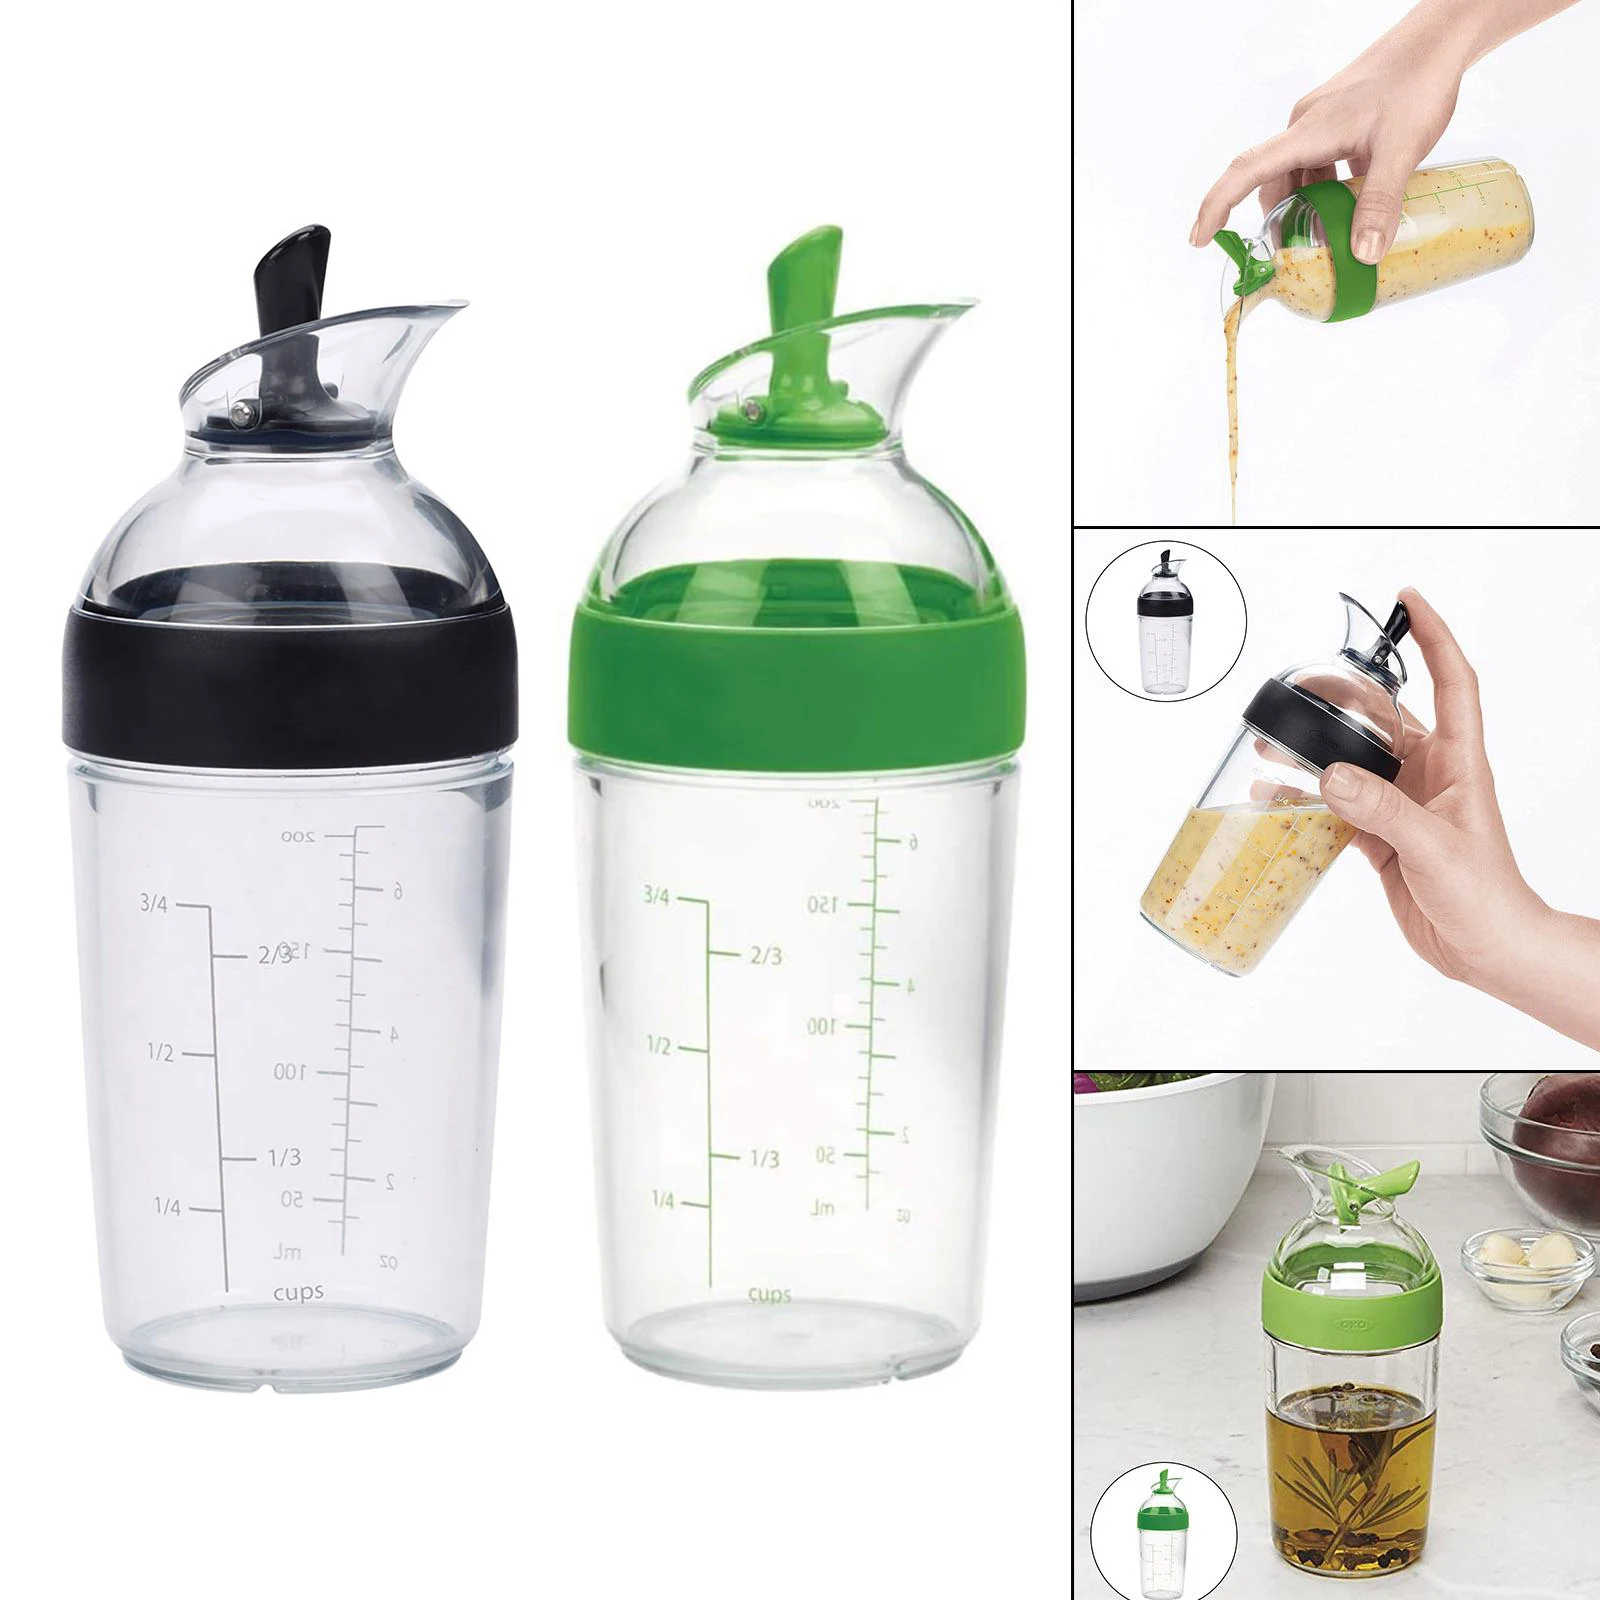 https://ae01.alicdn.com/kf/S54c5fe834f904fa4a902f6367c5c1339S/Salad-Dressing-Mixer-Cup-Container-Emulsifier-Bottle-Multifunctional-Manual-Mixer-for-Sauces-Kitchen-Appliance-for.jpg